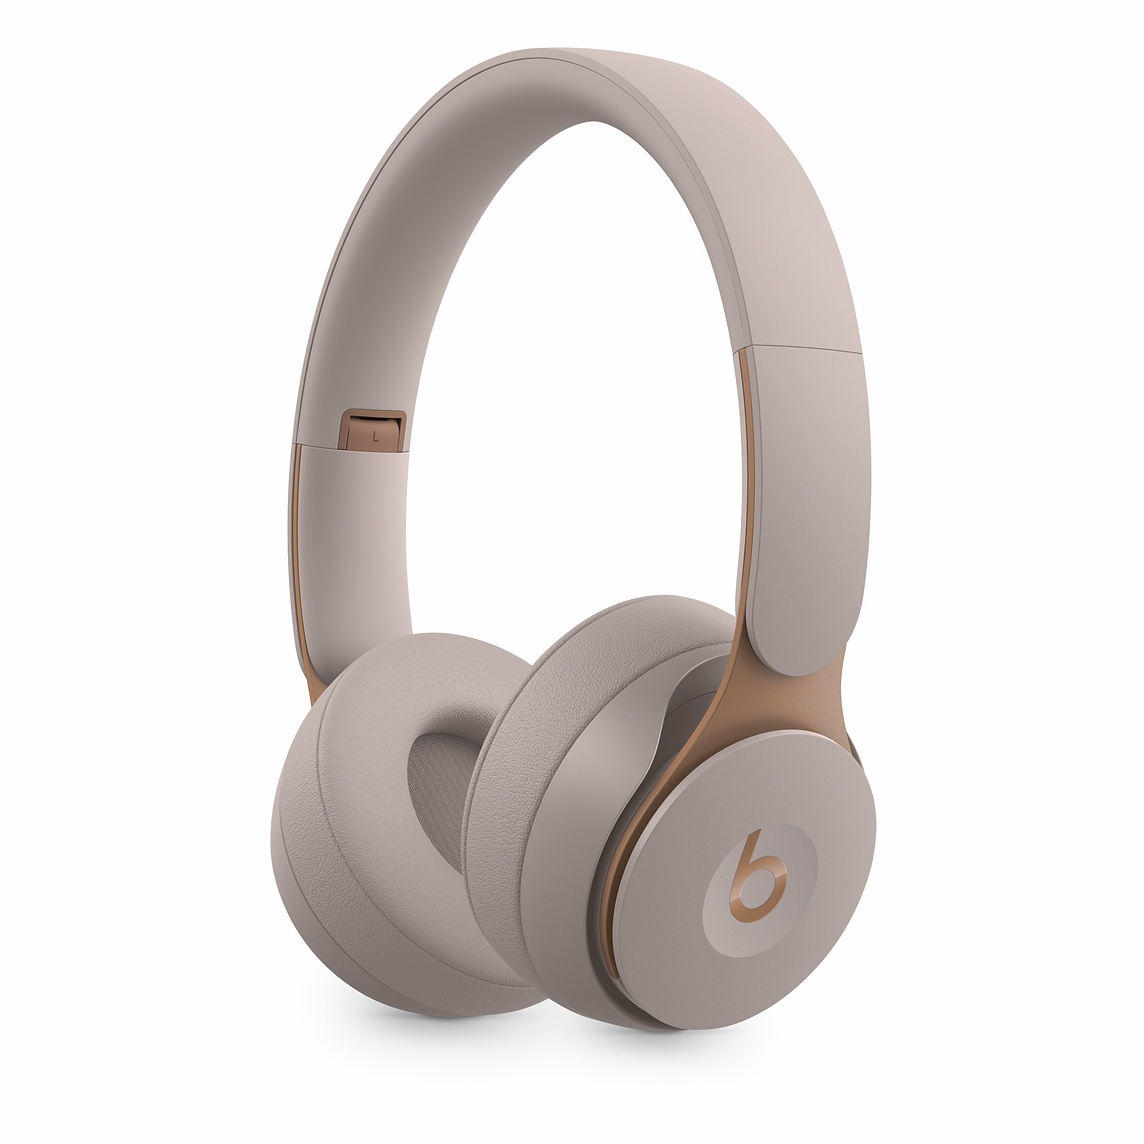 Buy Beats Solo Pro Wireless Noise Cancelling On Ear Headphones Grey Online Get Free Delivery Mcsteve Nigeria